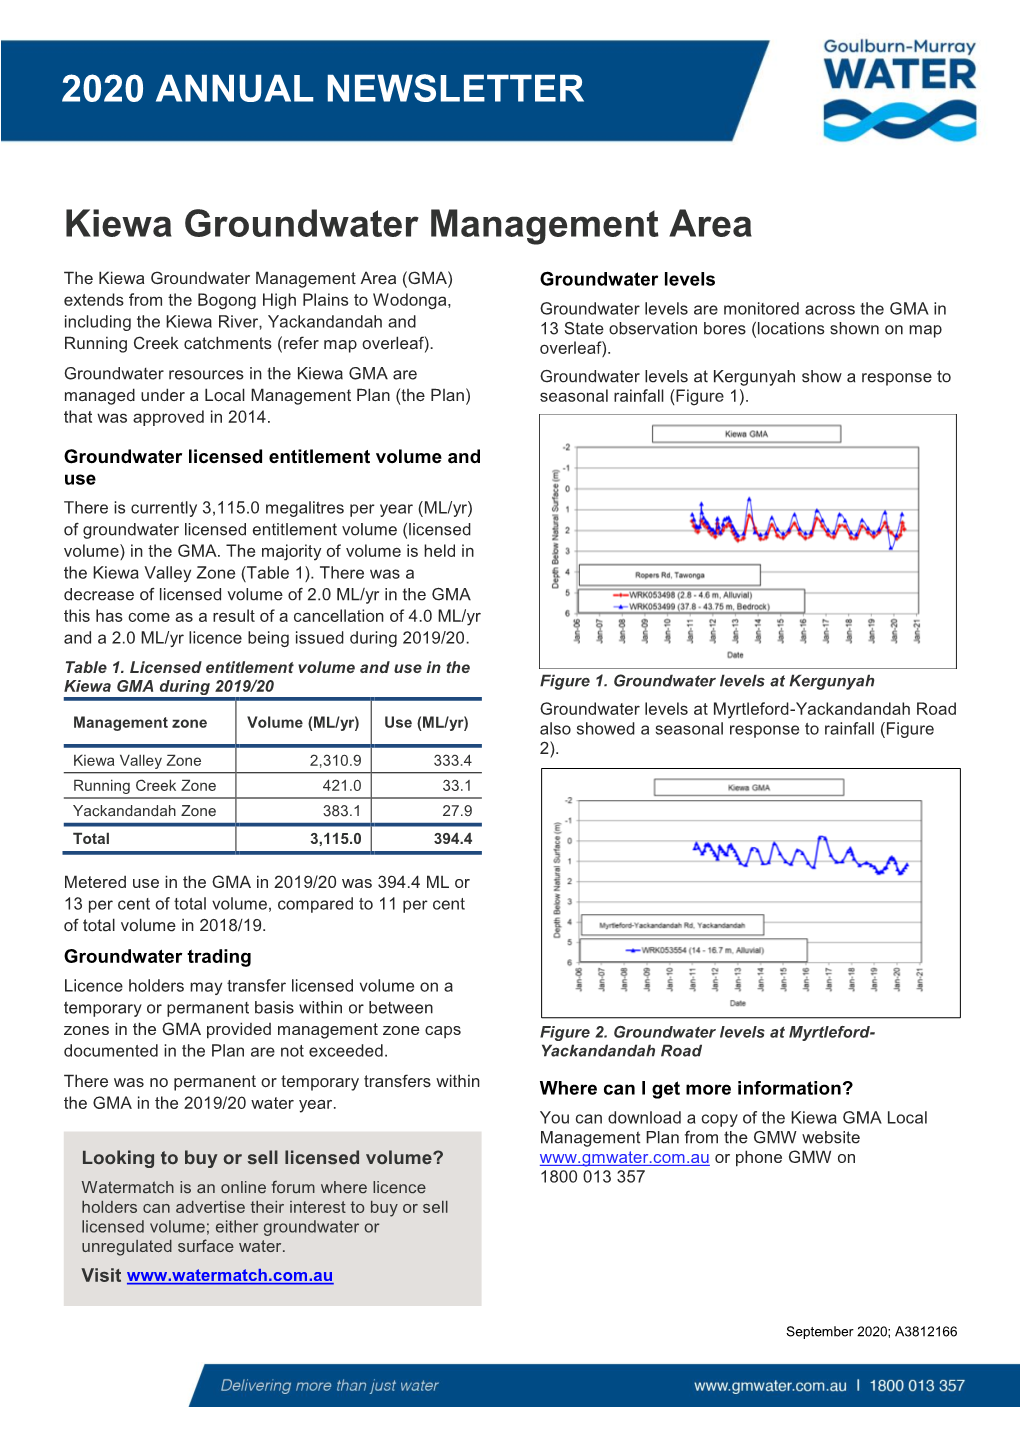 Kiewa Groundwater Management Area 2020 ANNUAL NEWSLETTER